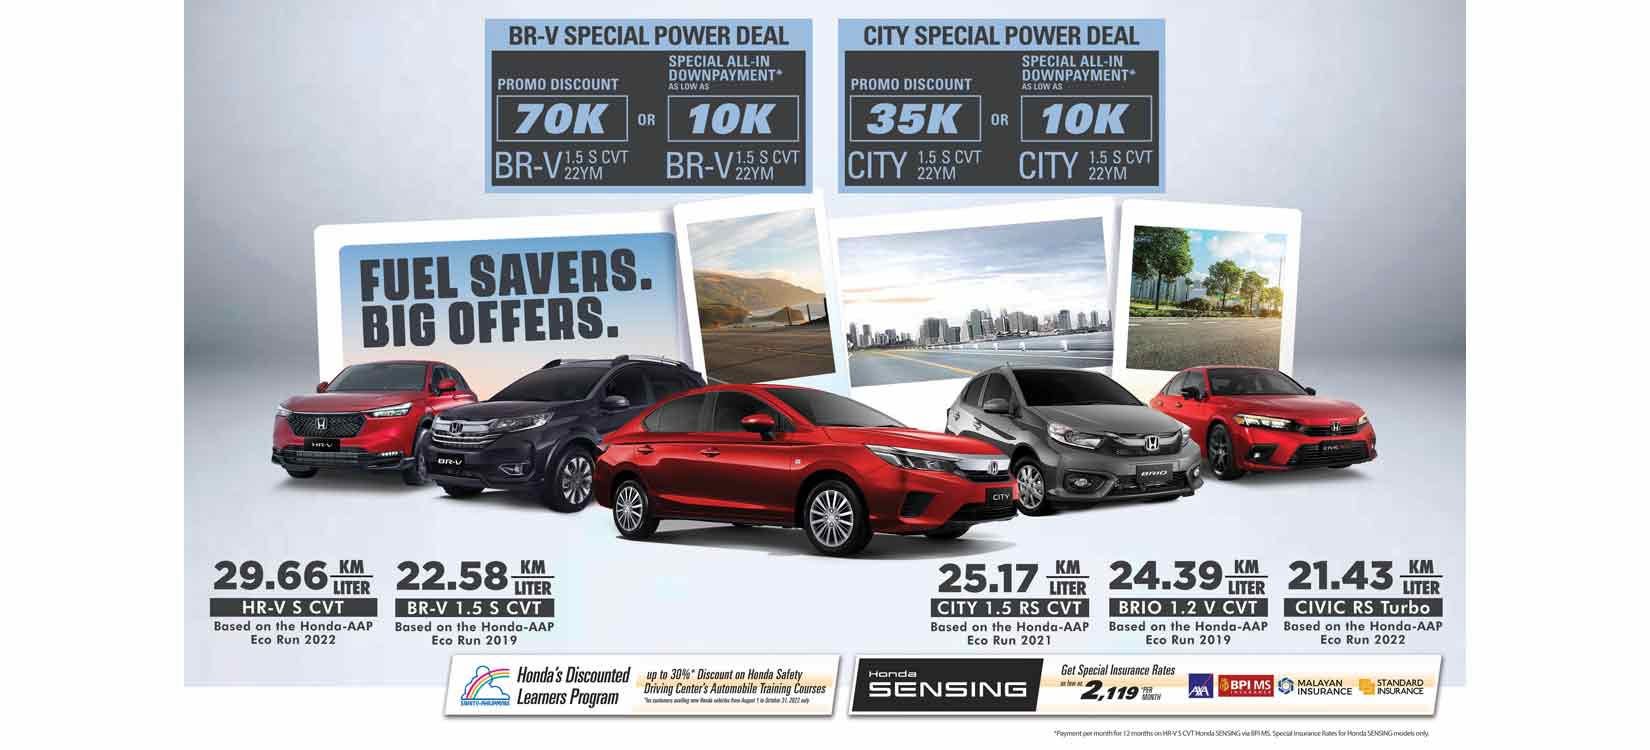 Double the excitement this September with the extension of Honda’s “Fuel Savers, Big Offers” and exclusive deals at Honda’s Exhibit at the 8th Phil. International Motor Show